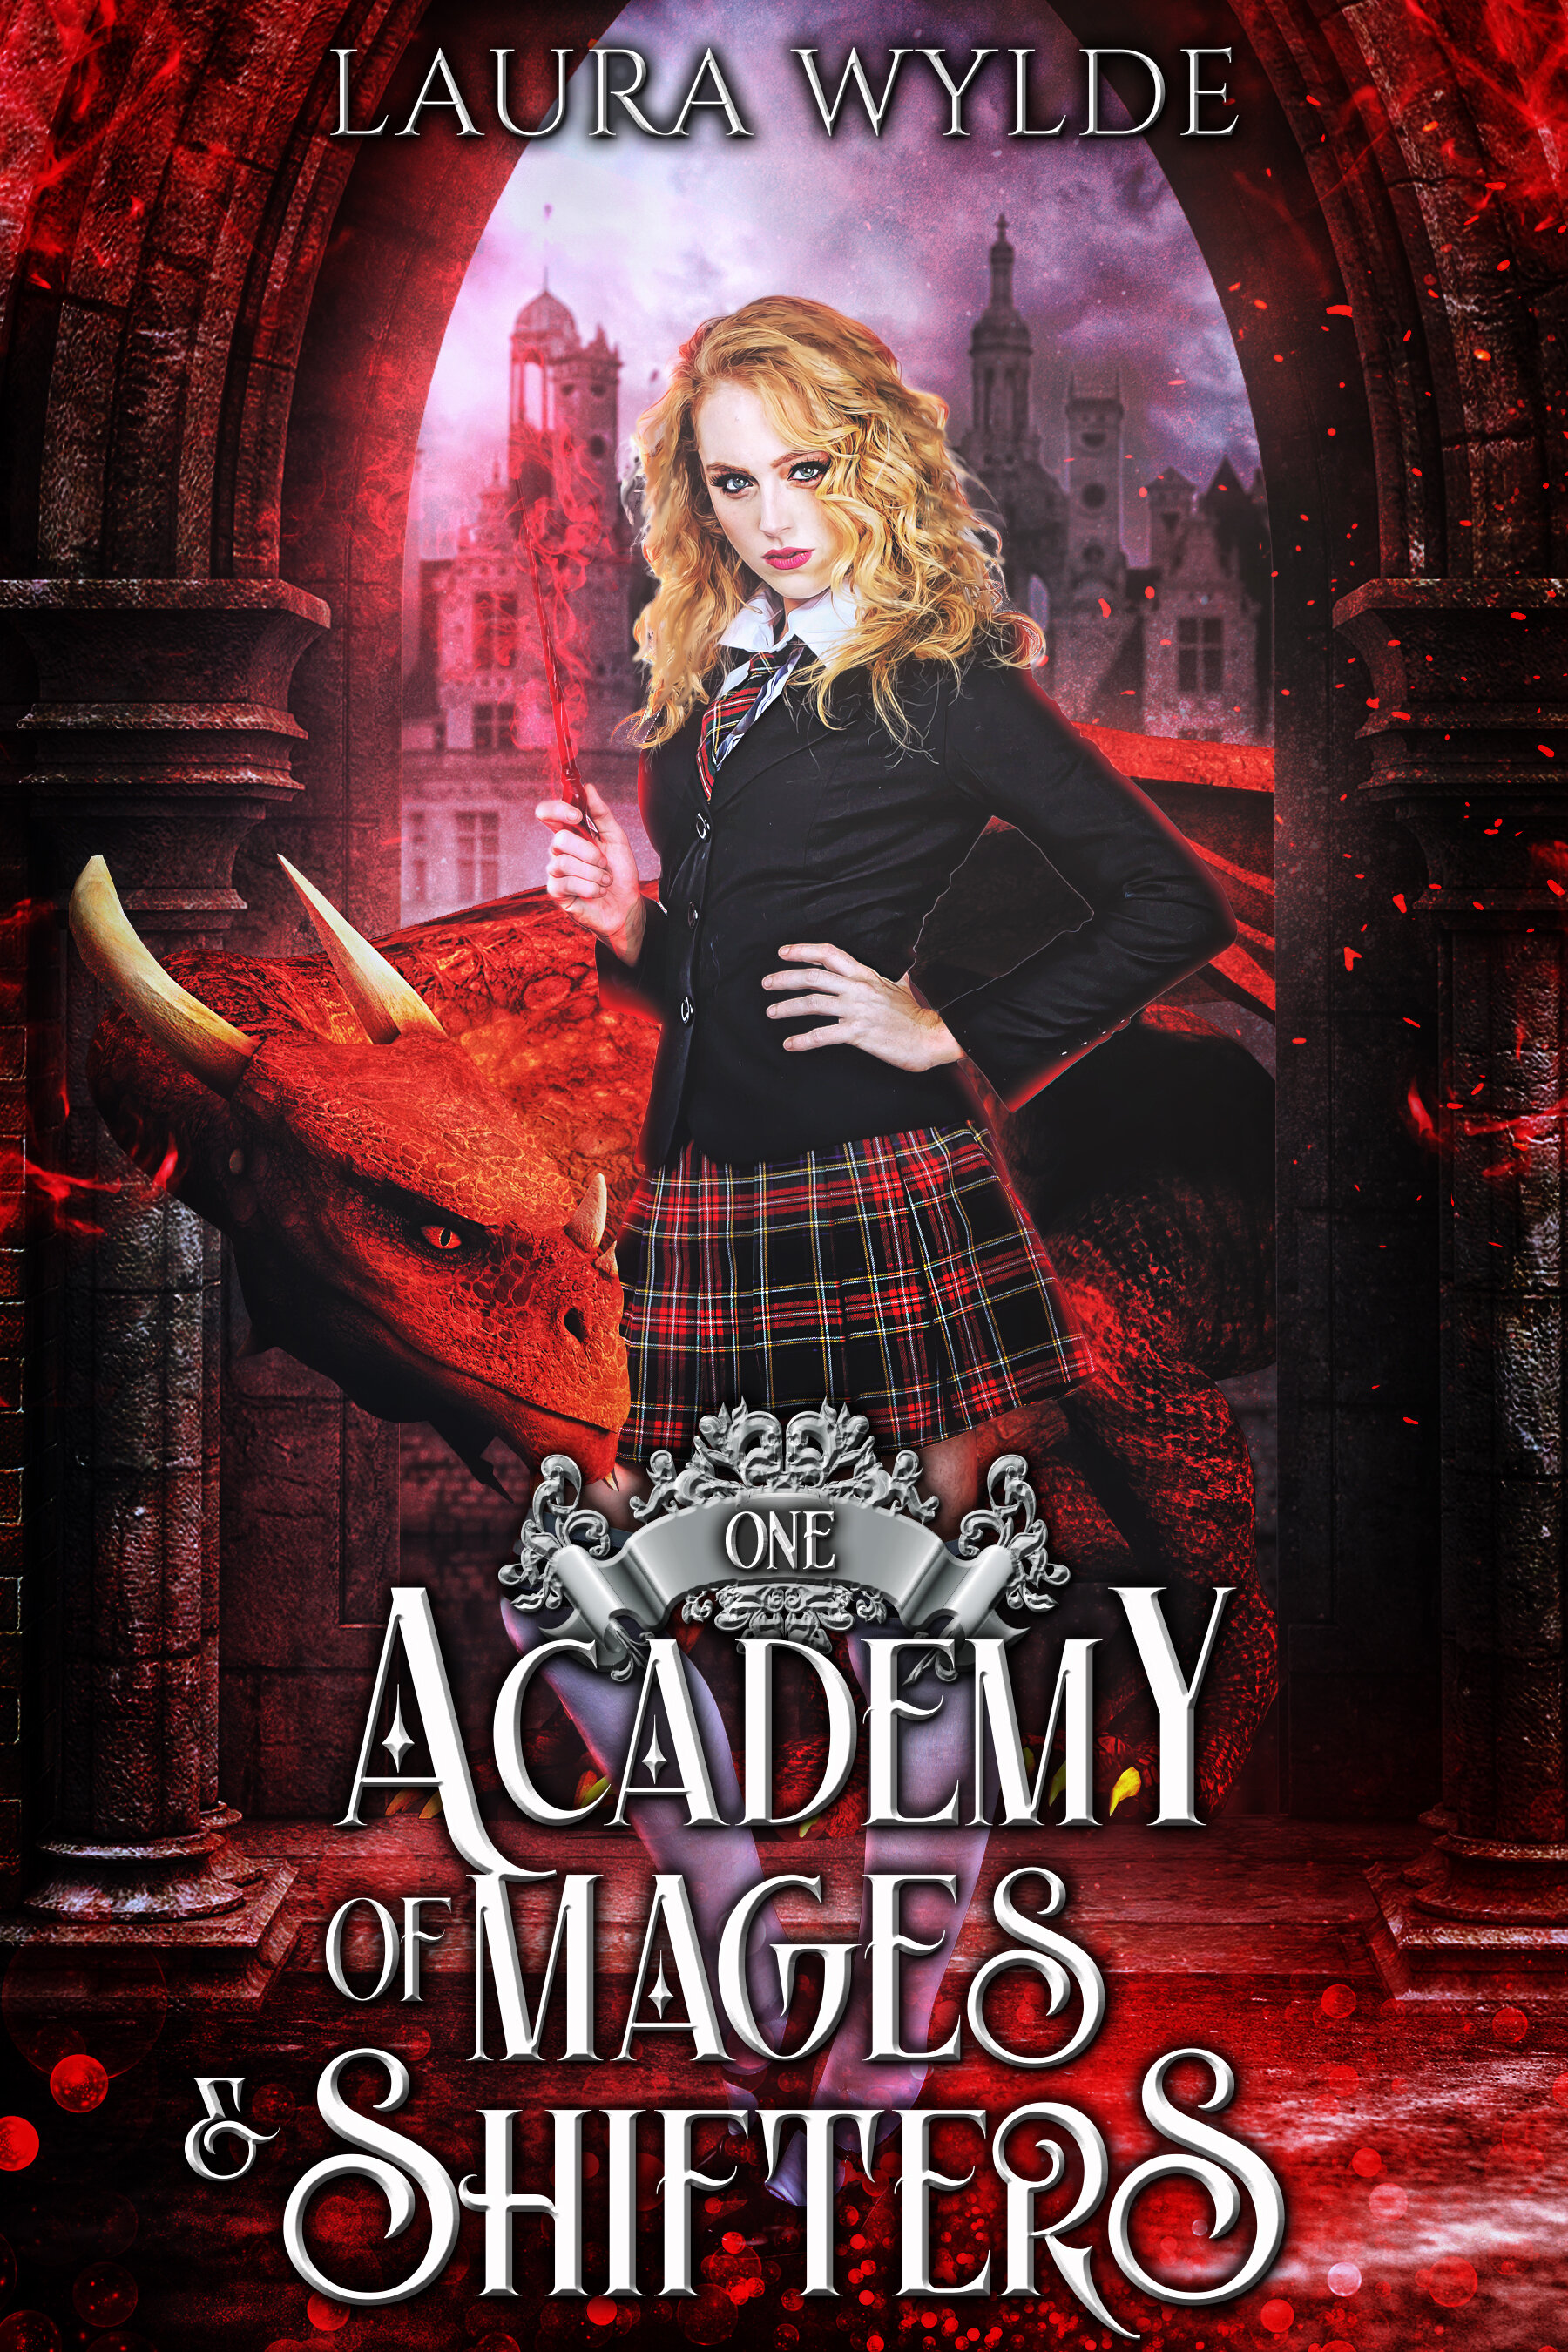 Laura Wylde - Academy of Mages & Shifters book 1 v3.jpg